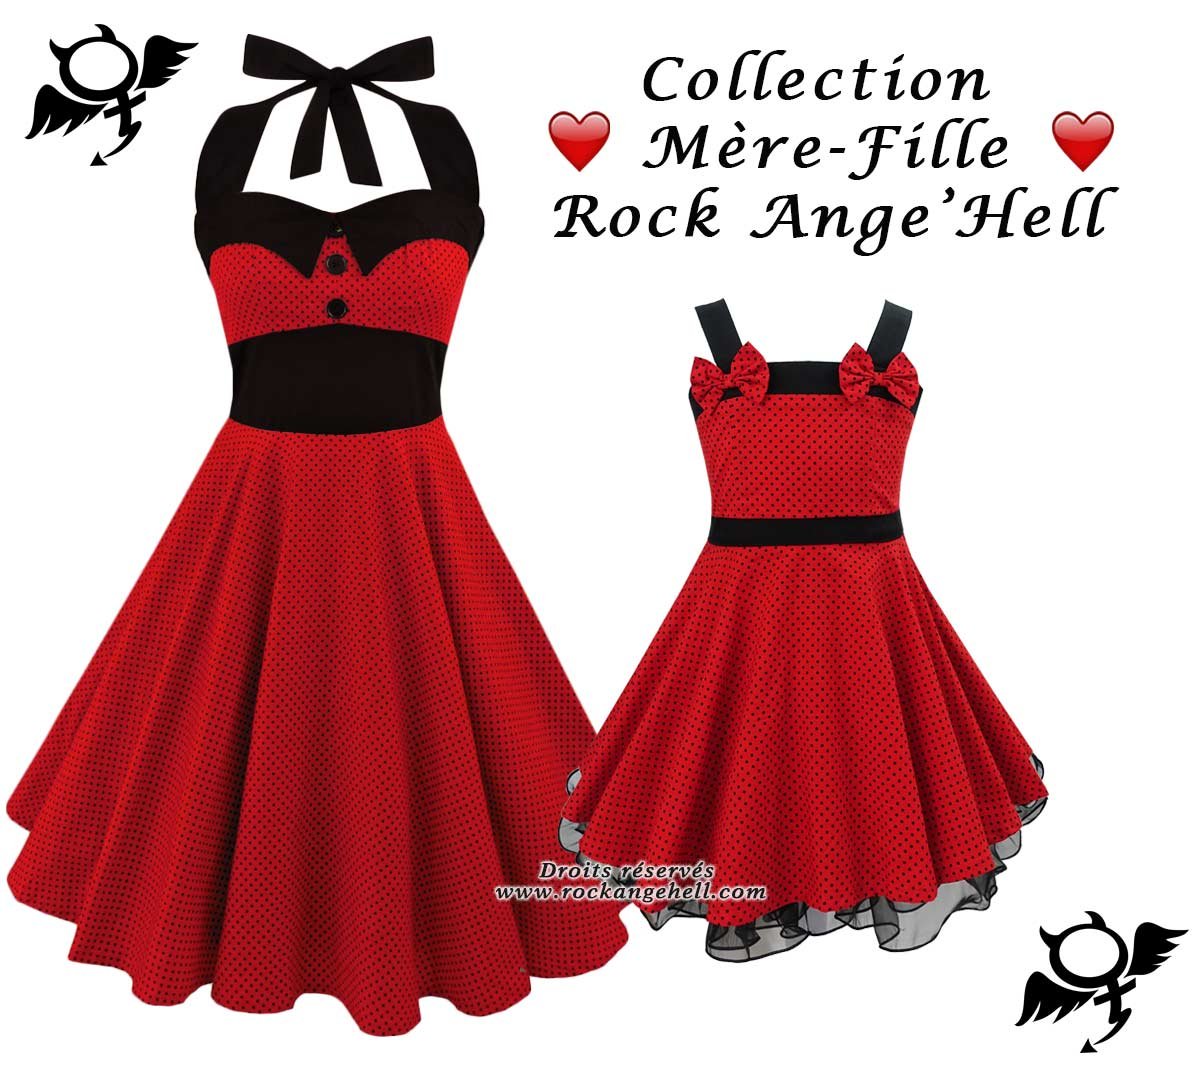 Collection-Rock-AngeHell-Mere-Fille1.jpg